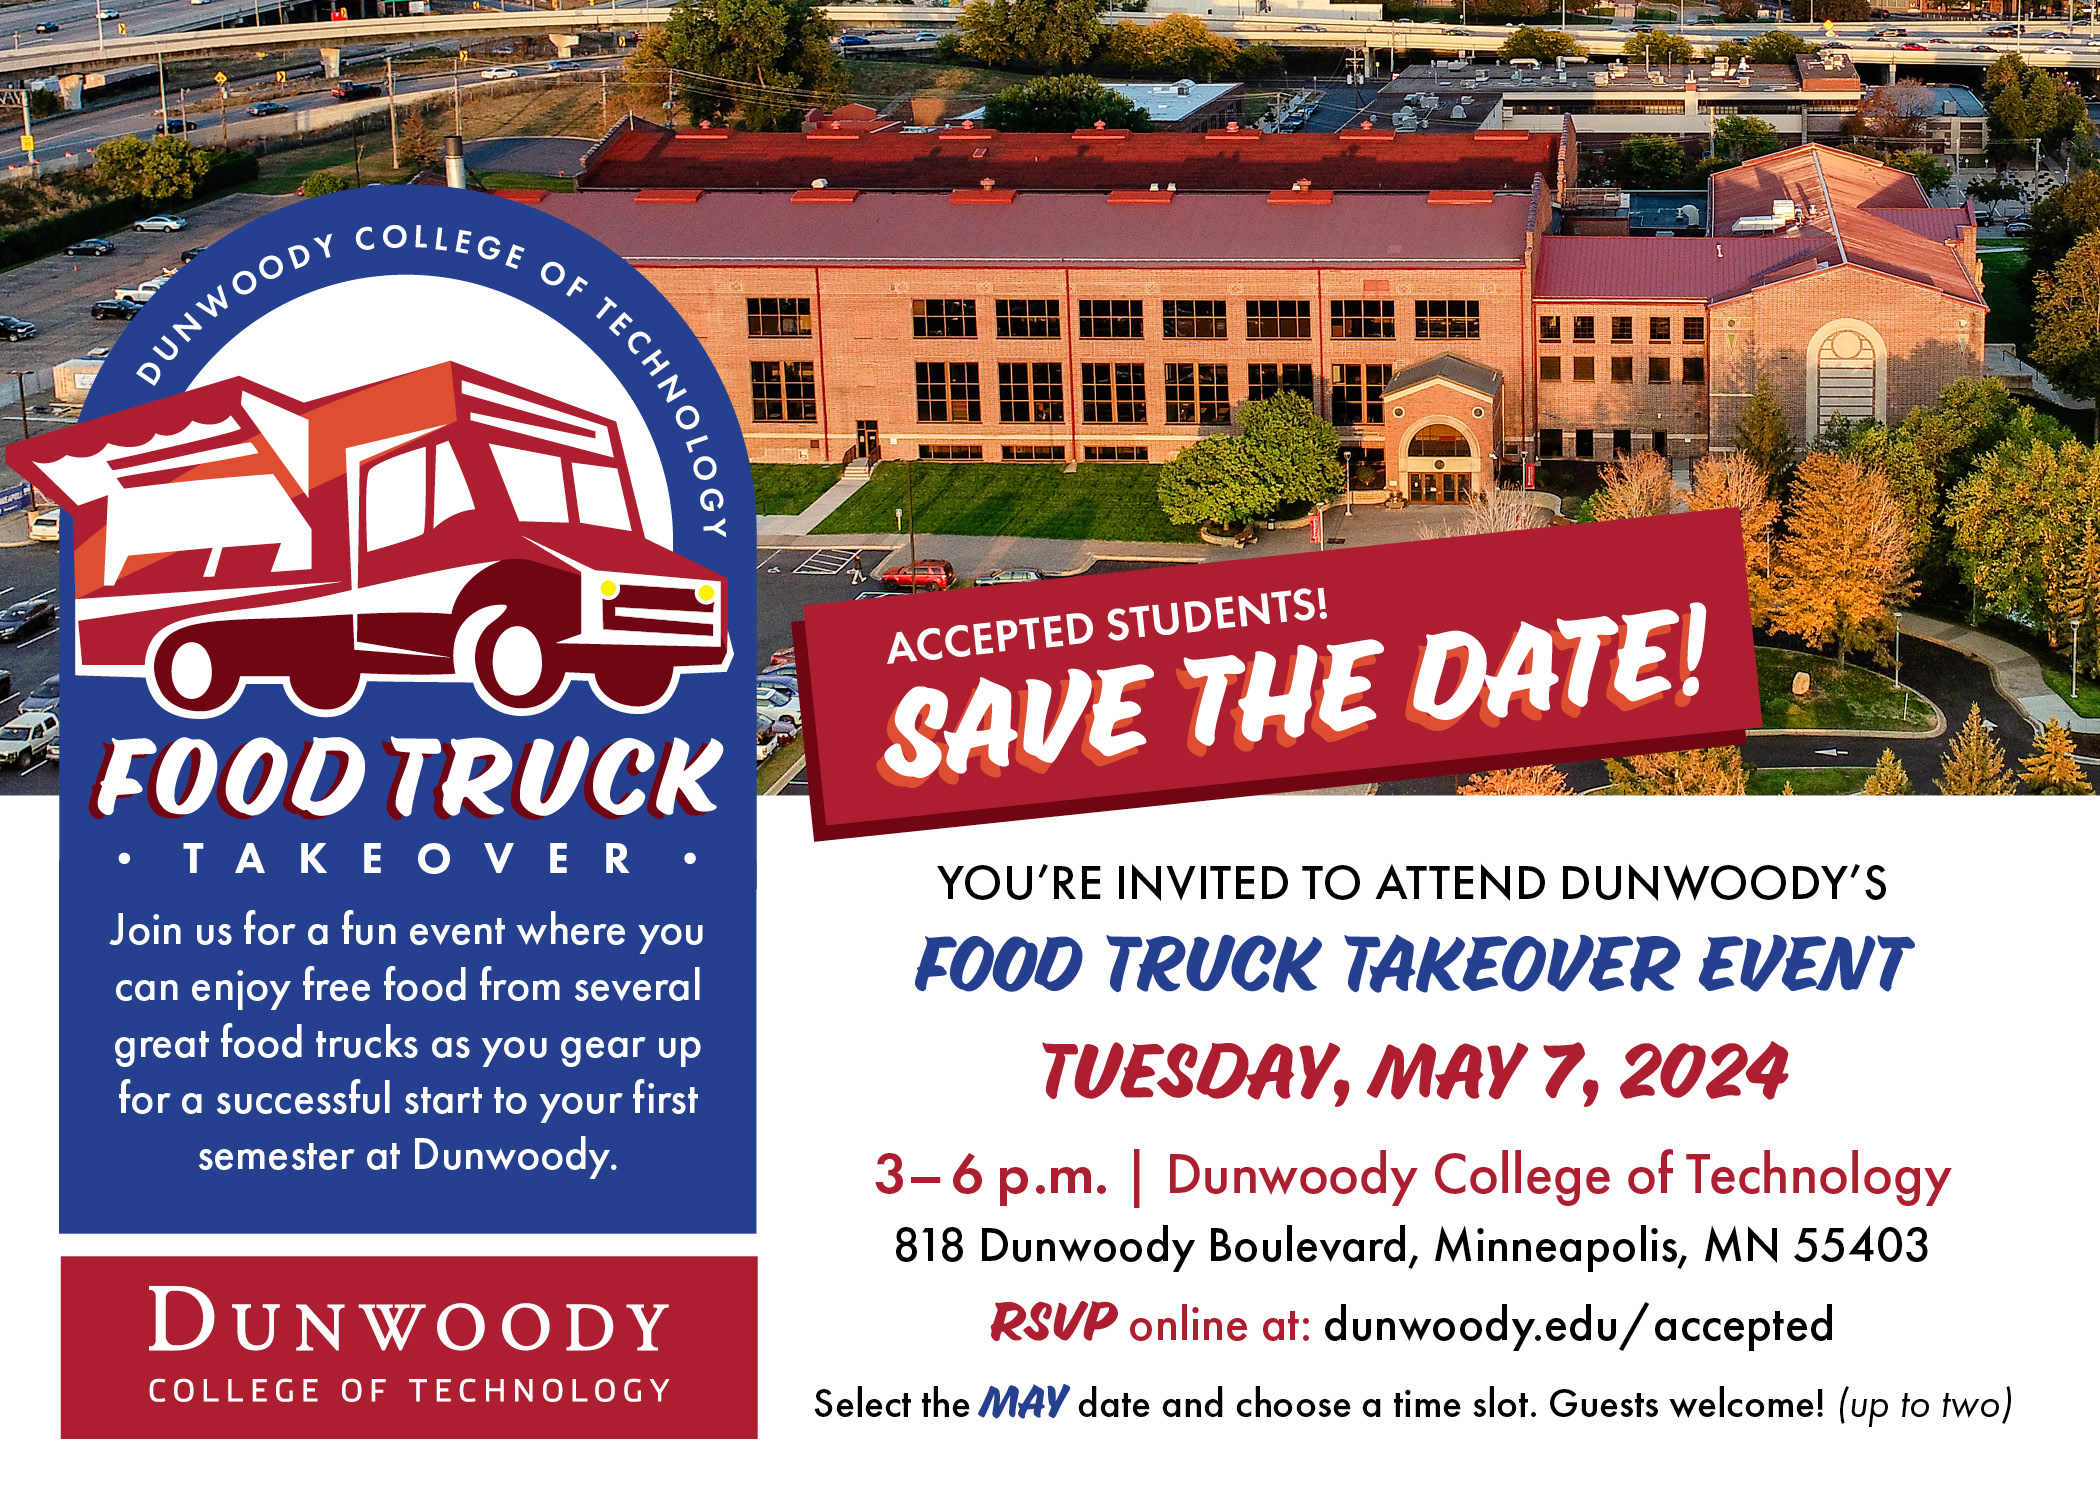 Image of the invite for the Food Truck Takeover event on May 7